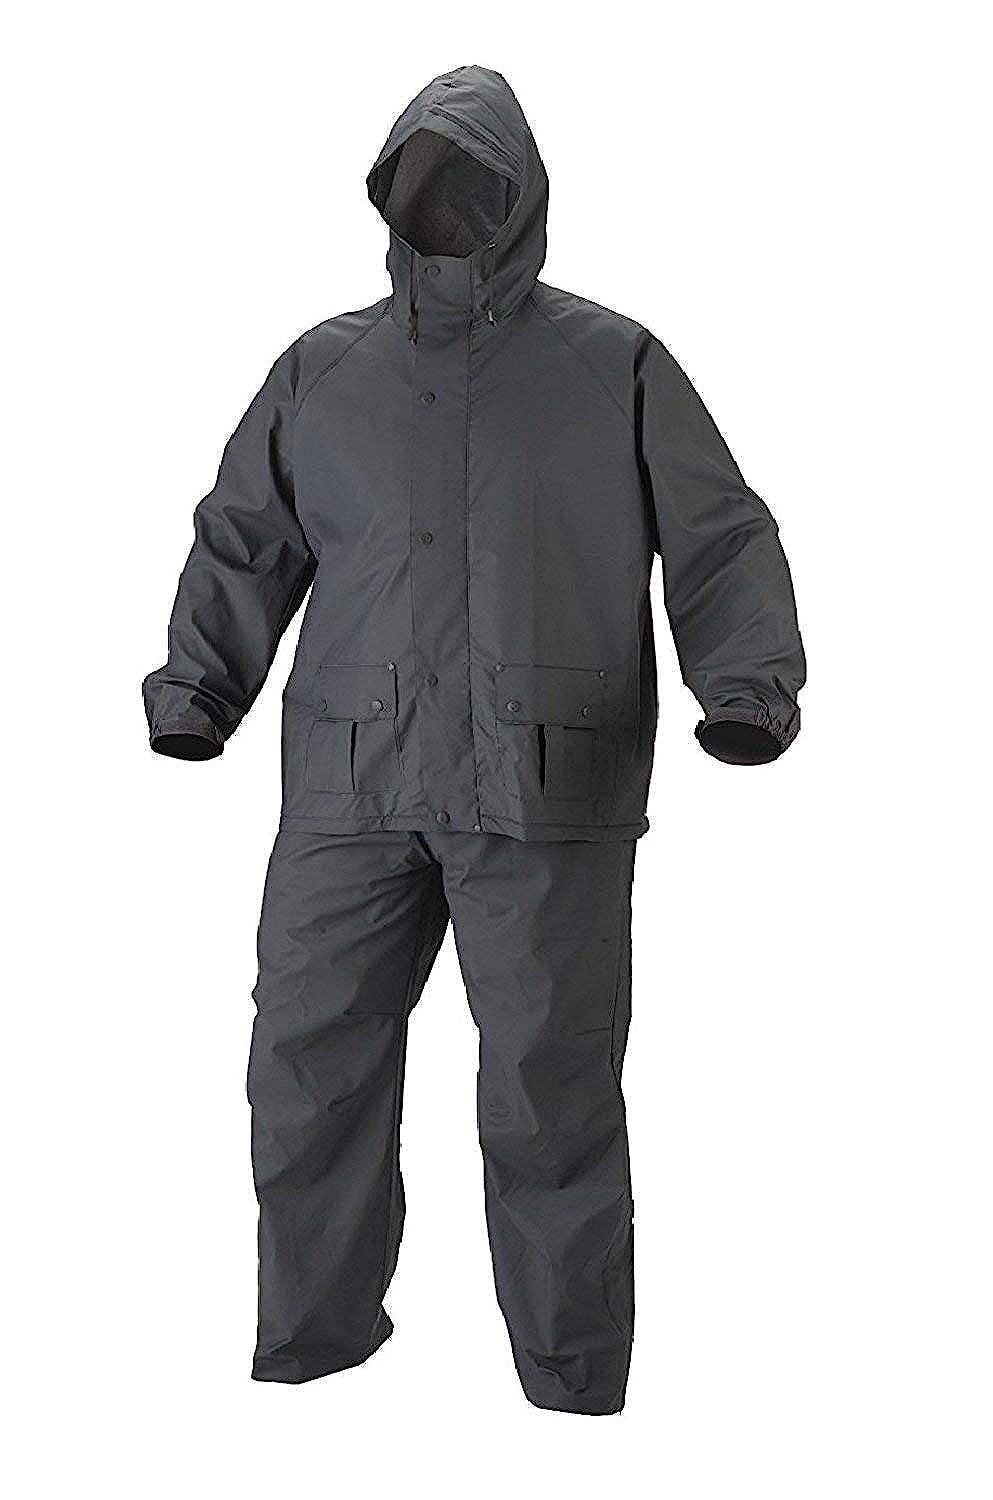 Rain Coat 100% Waterproof with Hood_Set of Top and Bottom Packed in a Storage Bag ( Color May Vary)